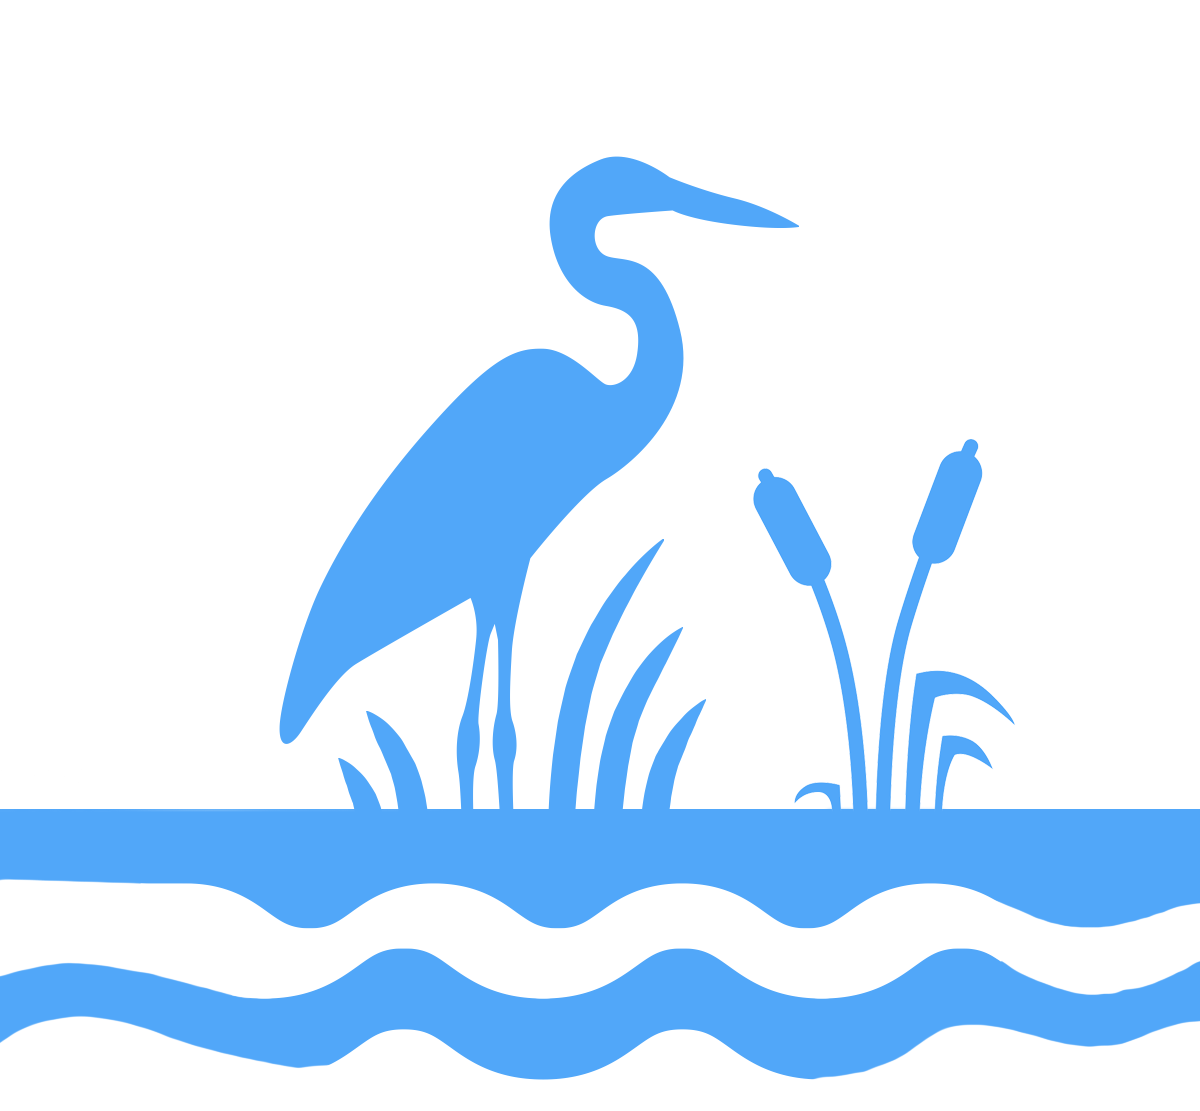 Ecosystems icon - A heron standing in water